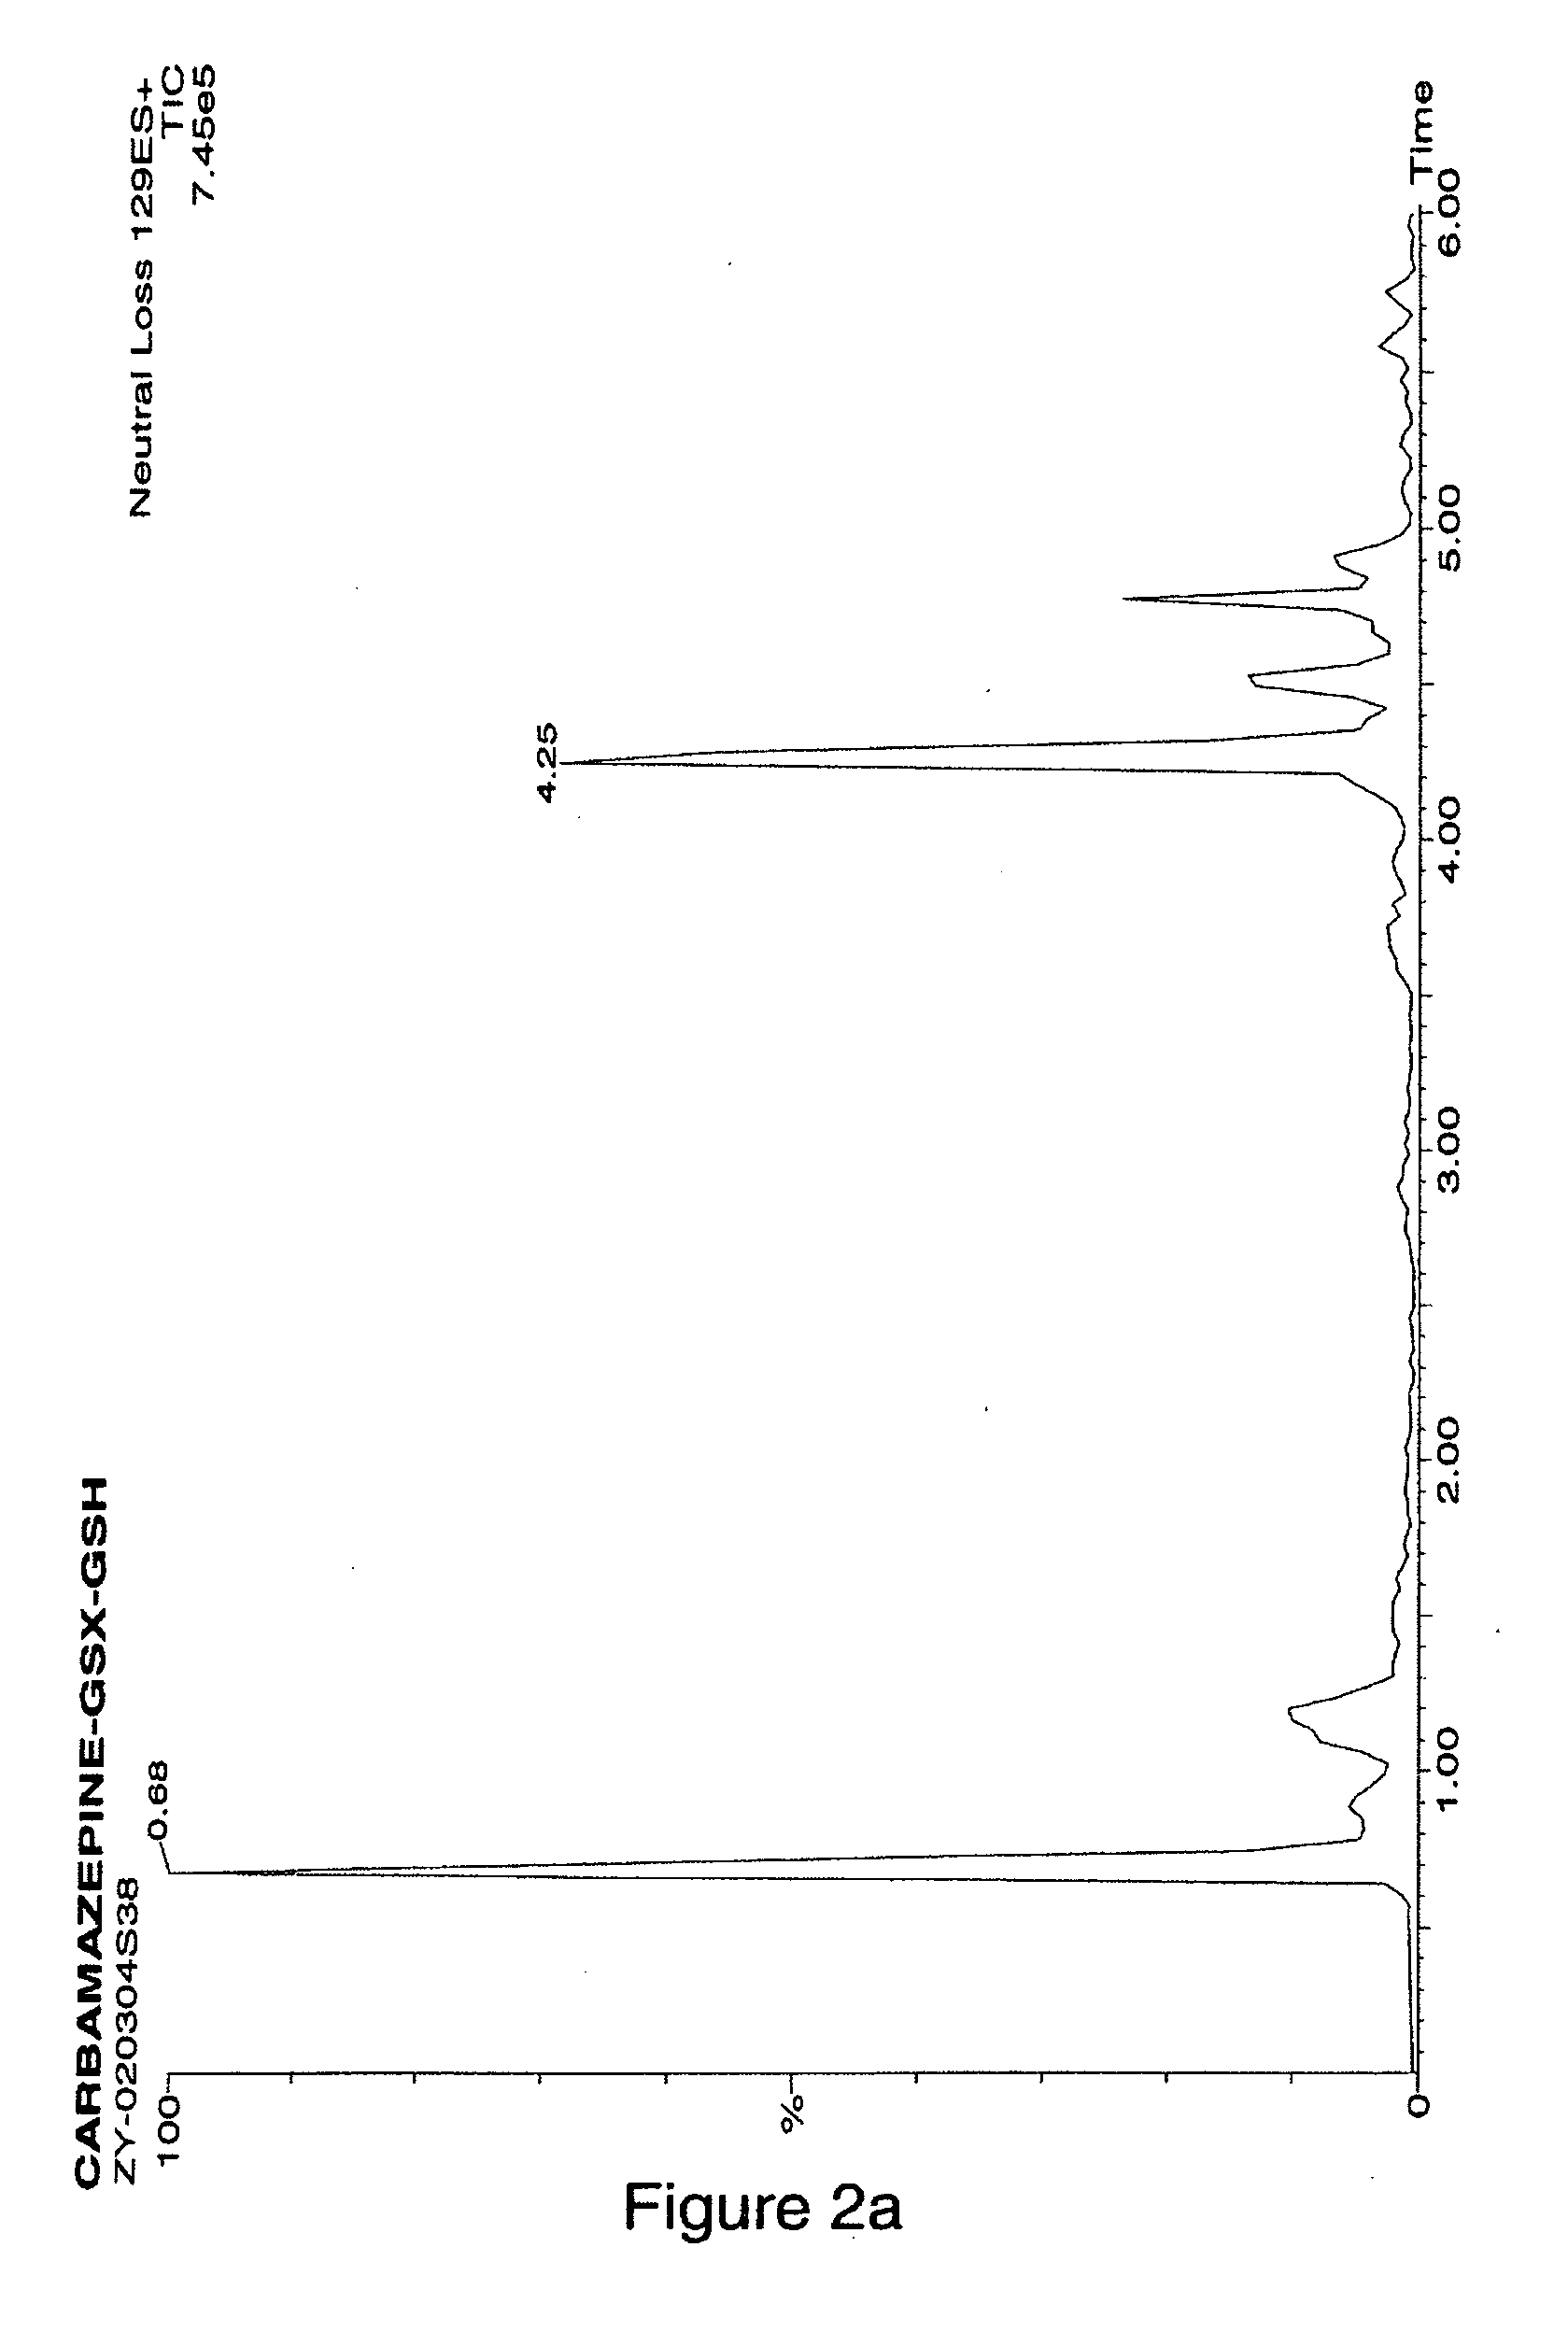 Method for detecting reactive metabolites using stable-isotope trapping and mass spectroscopy